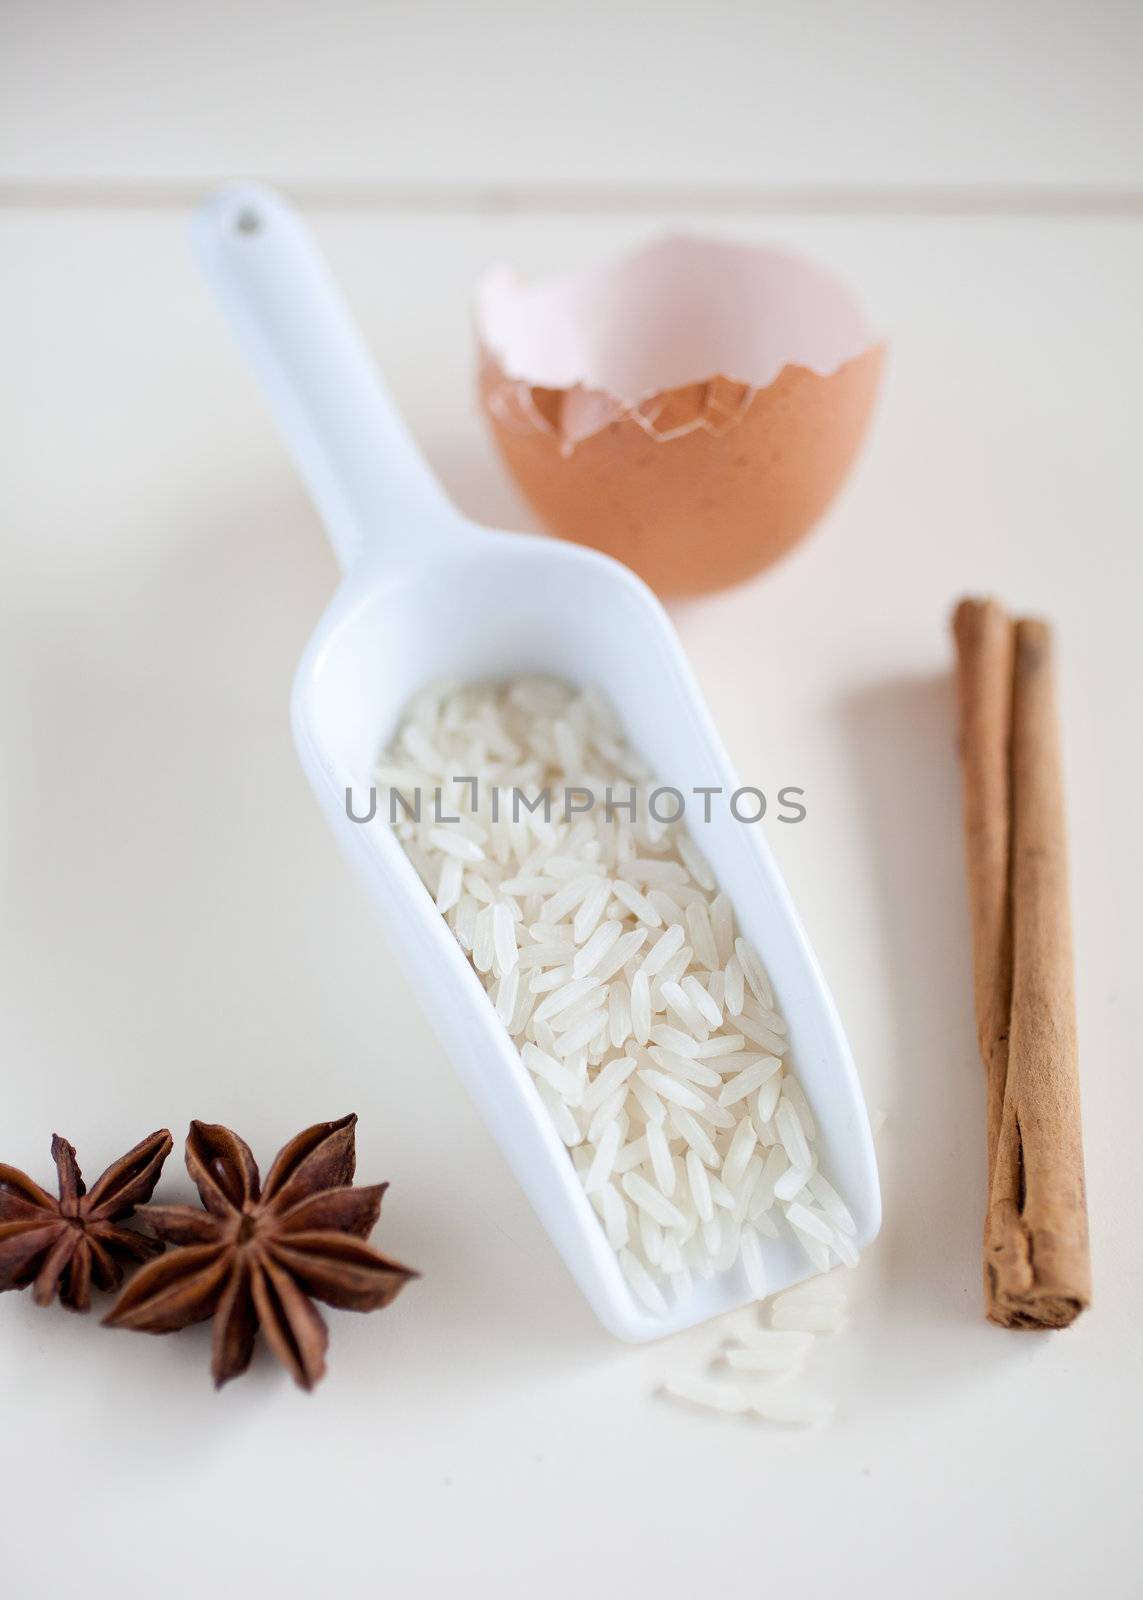 Ingredients that are used for making traditional ricepudding